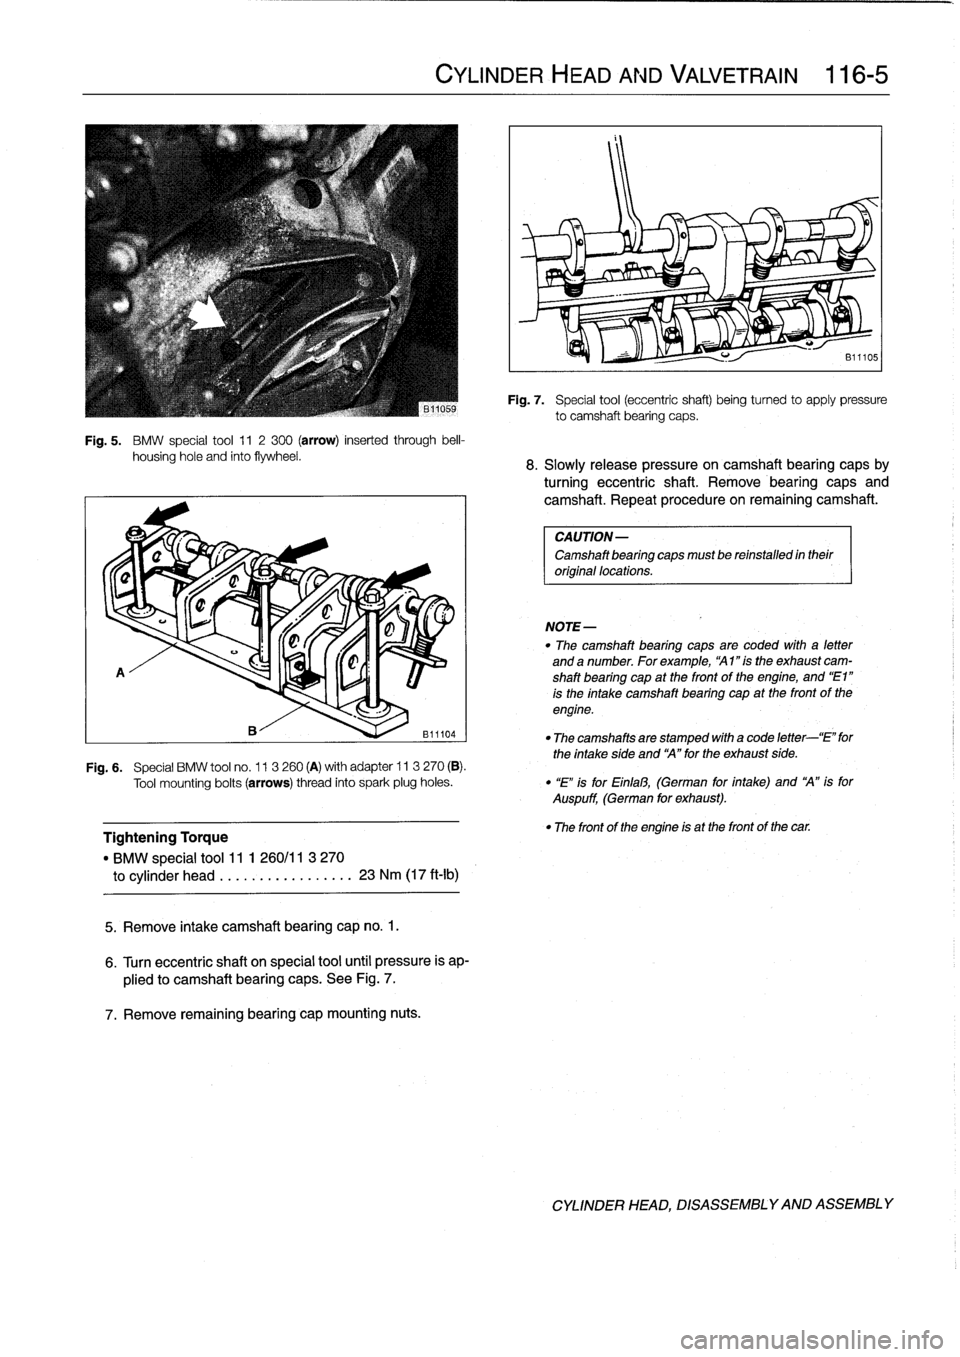 BMW M3 1996 E36 Workshop Manual 
Fig
.
5
.

	

BMW
special
tool
11
2300
(arrow)
inserted
through
bell-
housing
hole
and
finto
flywheel
.

A

Tightening
Torque

"
BMW
special
tool11
1
260/11
3
270

to
cylinder
head
.................
